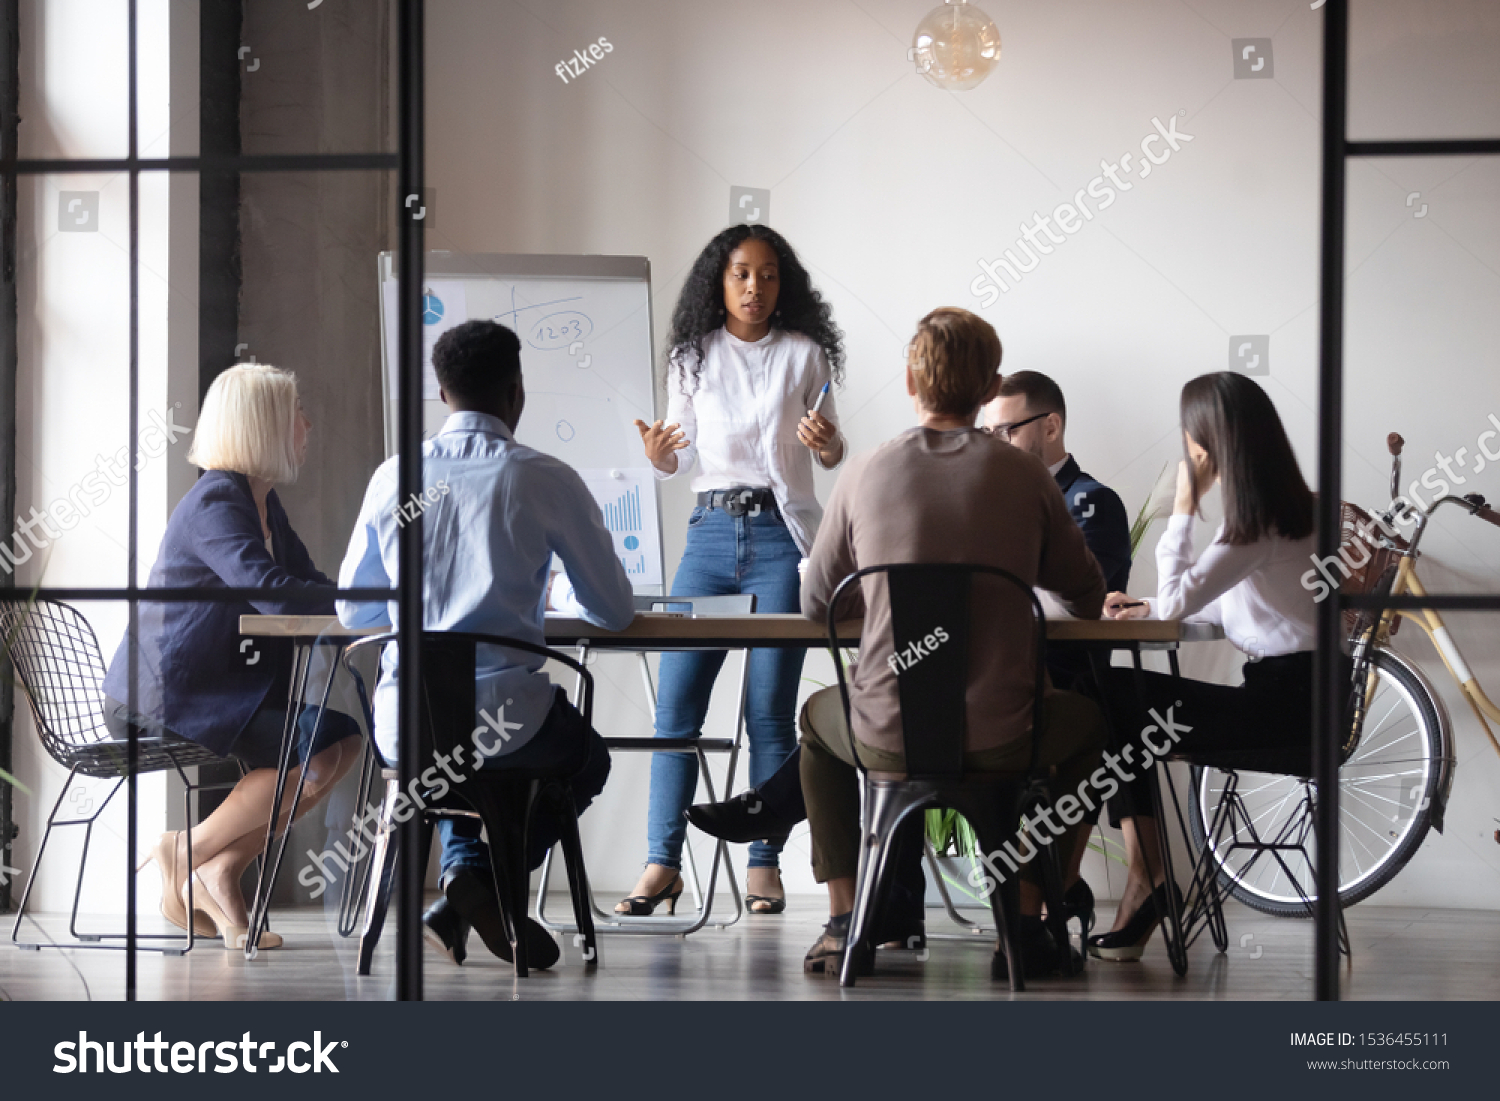 Confident african businesswoman presenter coach give corporate whiteboard presentation training multiracial people group explain project at team briefing staff conference, business education concept #1536455111